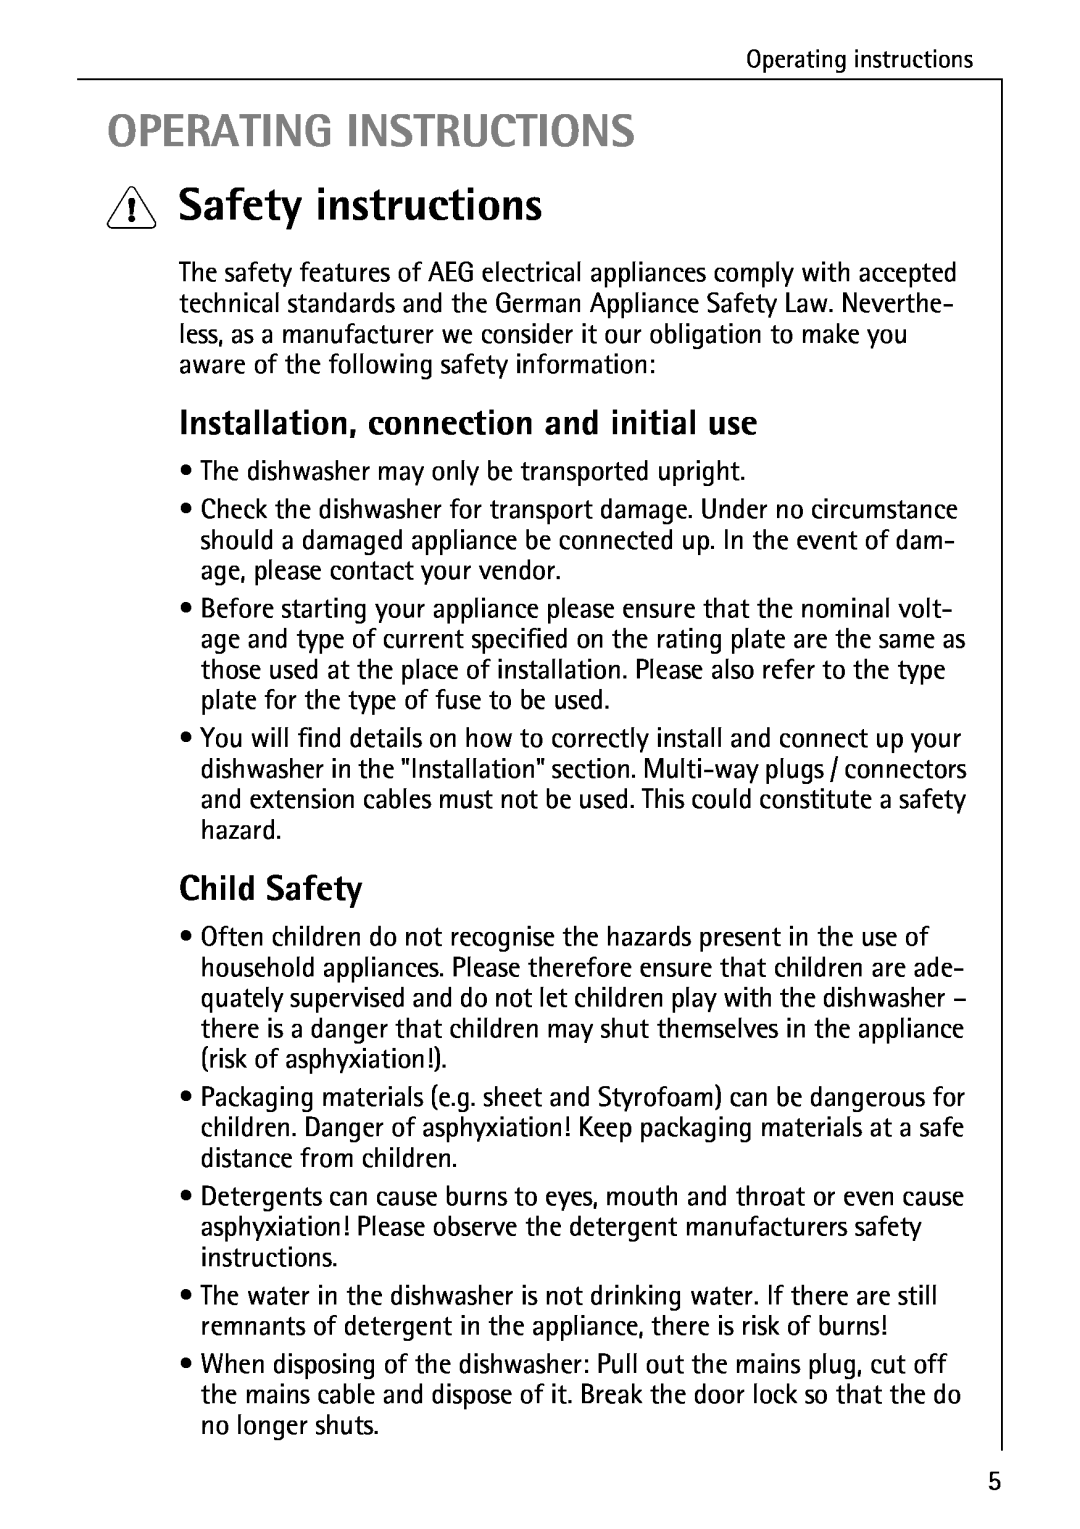 AEG 6281 I manual Operating Instructions, Safety instructions, Installation, connection and initial use, Child Safety 